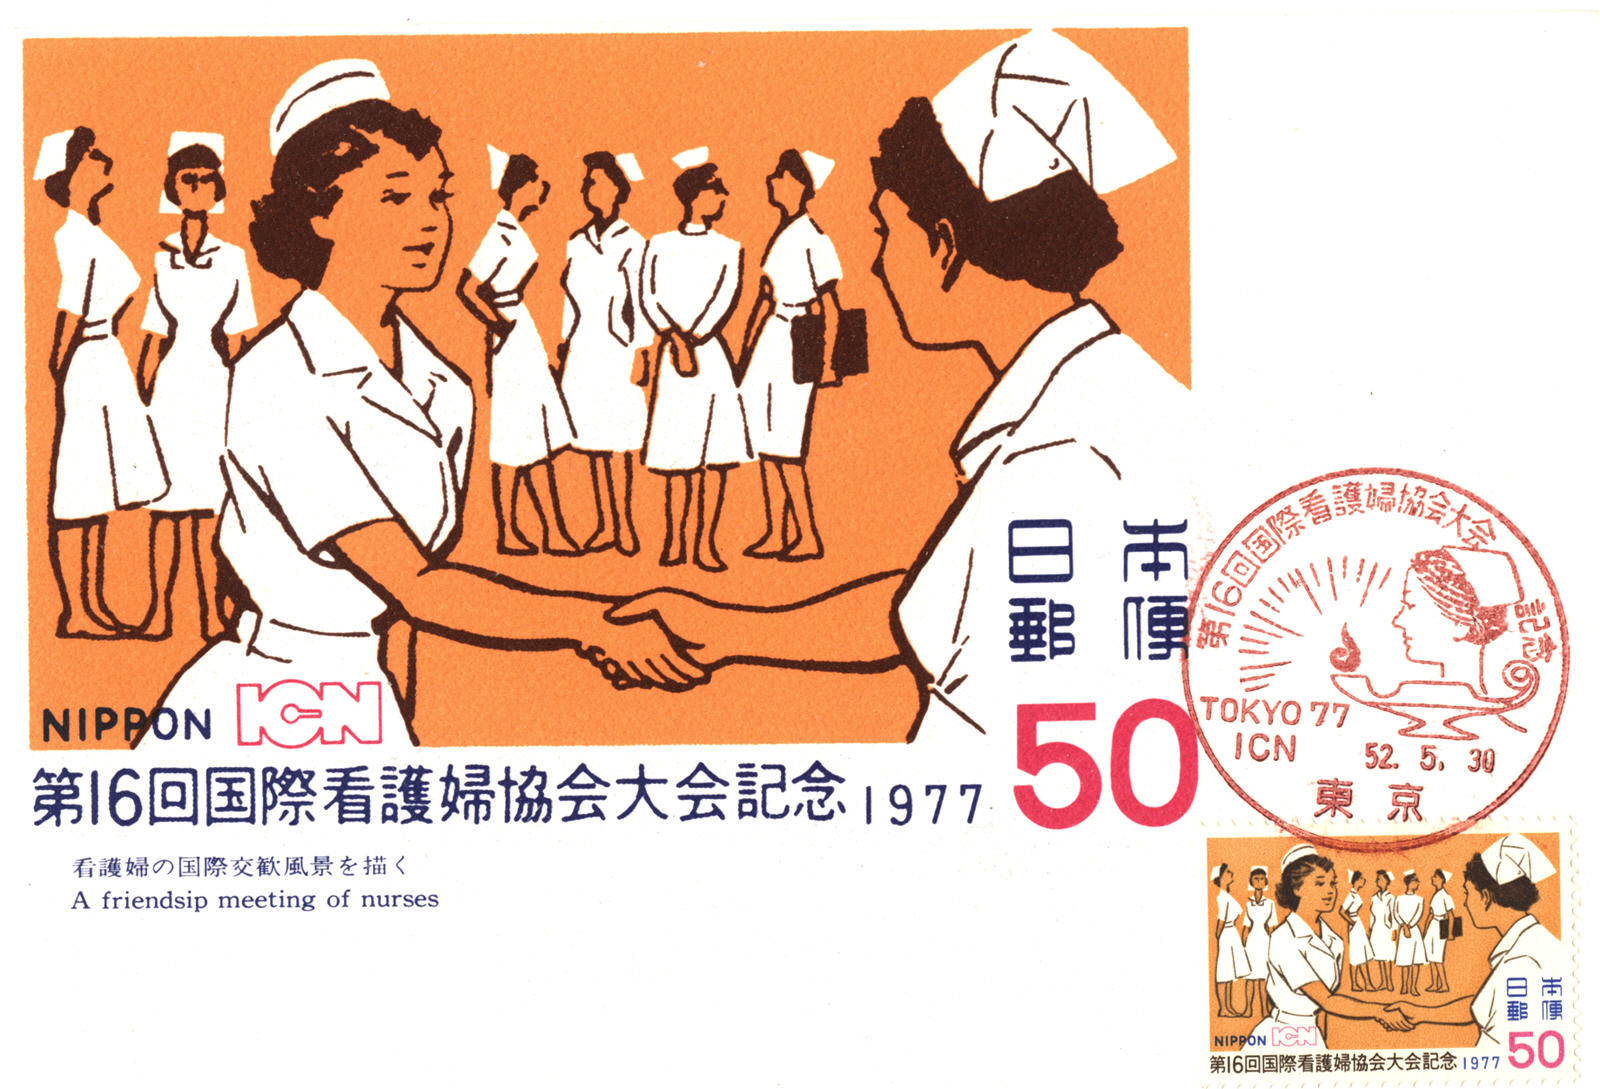 Female nurse in white shaking hands with another female nurse, in front of group of women nurses.